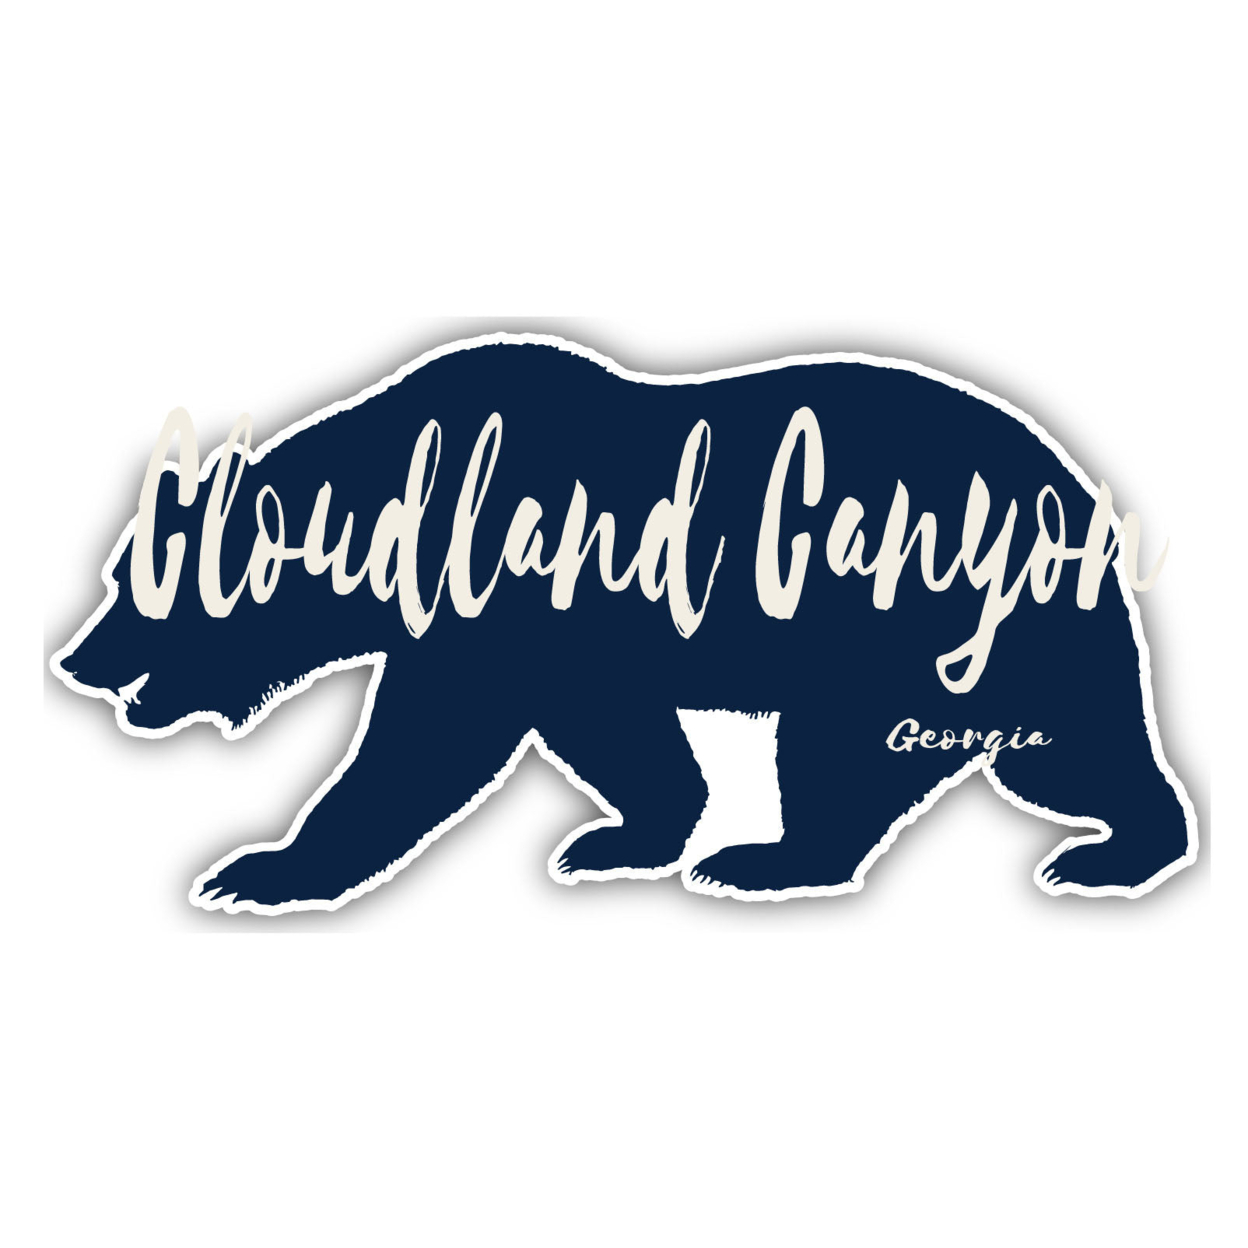 Cloudland Canyon Georgia Souvenir Decorative Stickers (Choose Theme And Size) - 4-Pack, 8-Inch, Tent